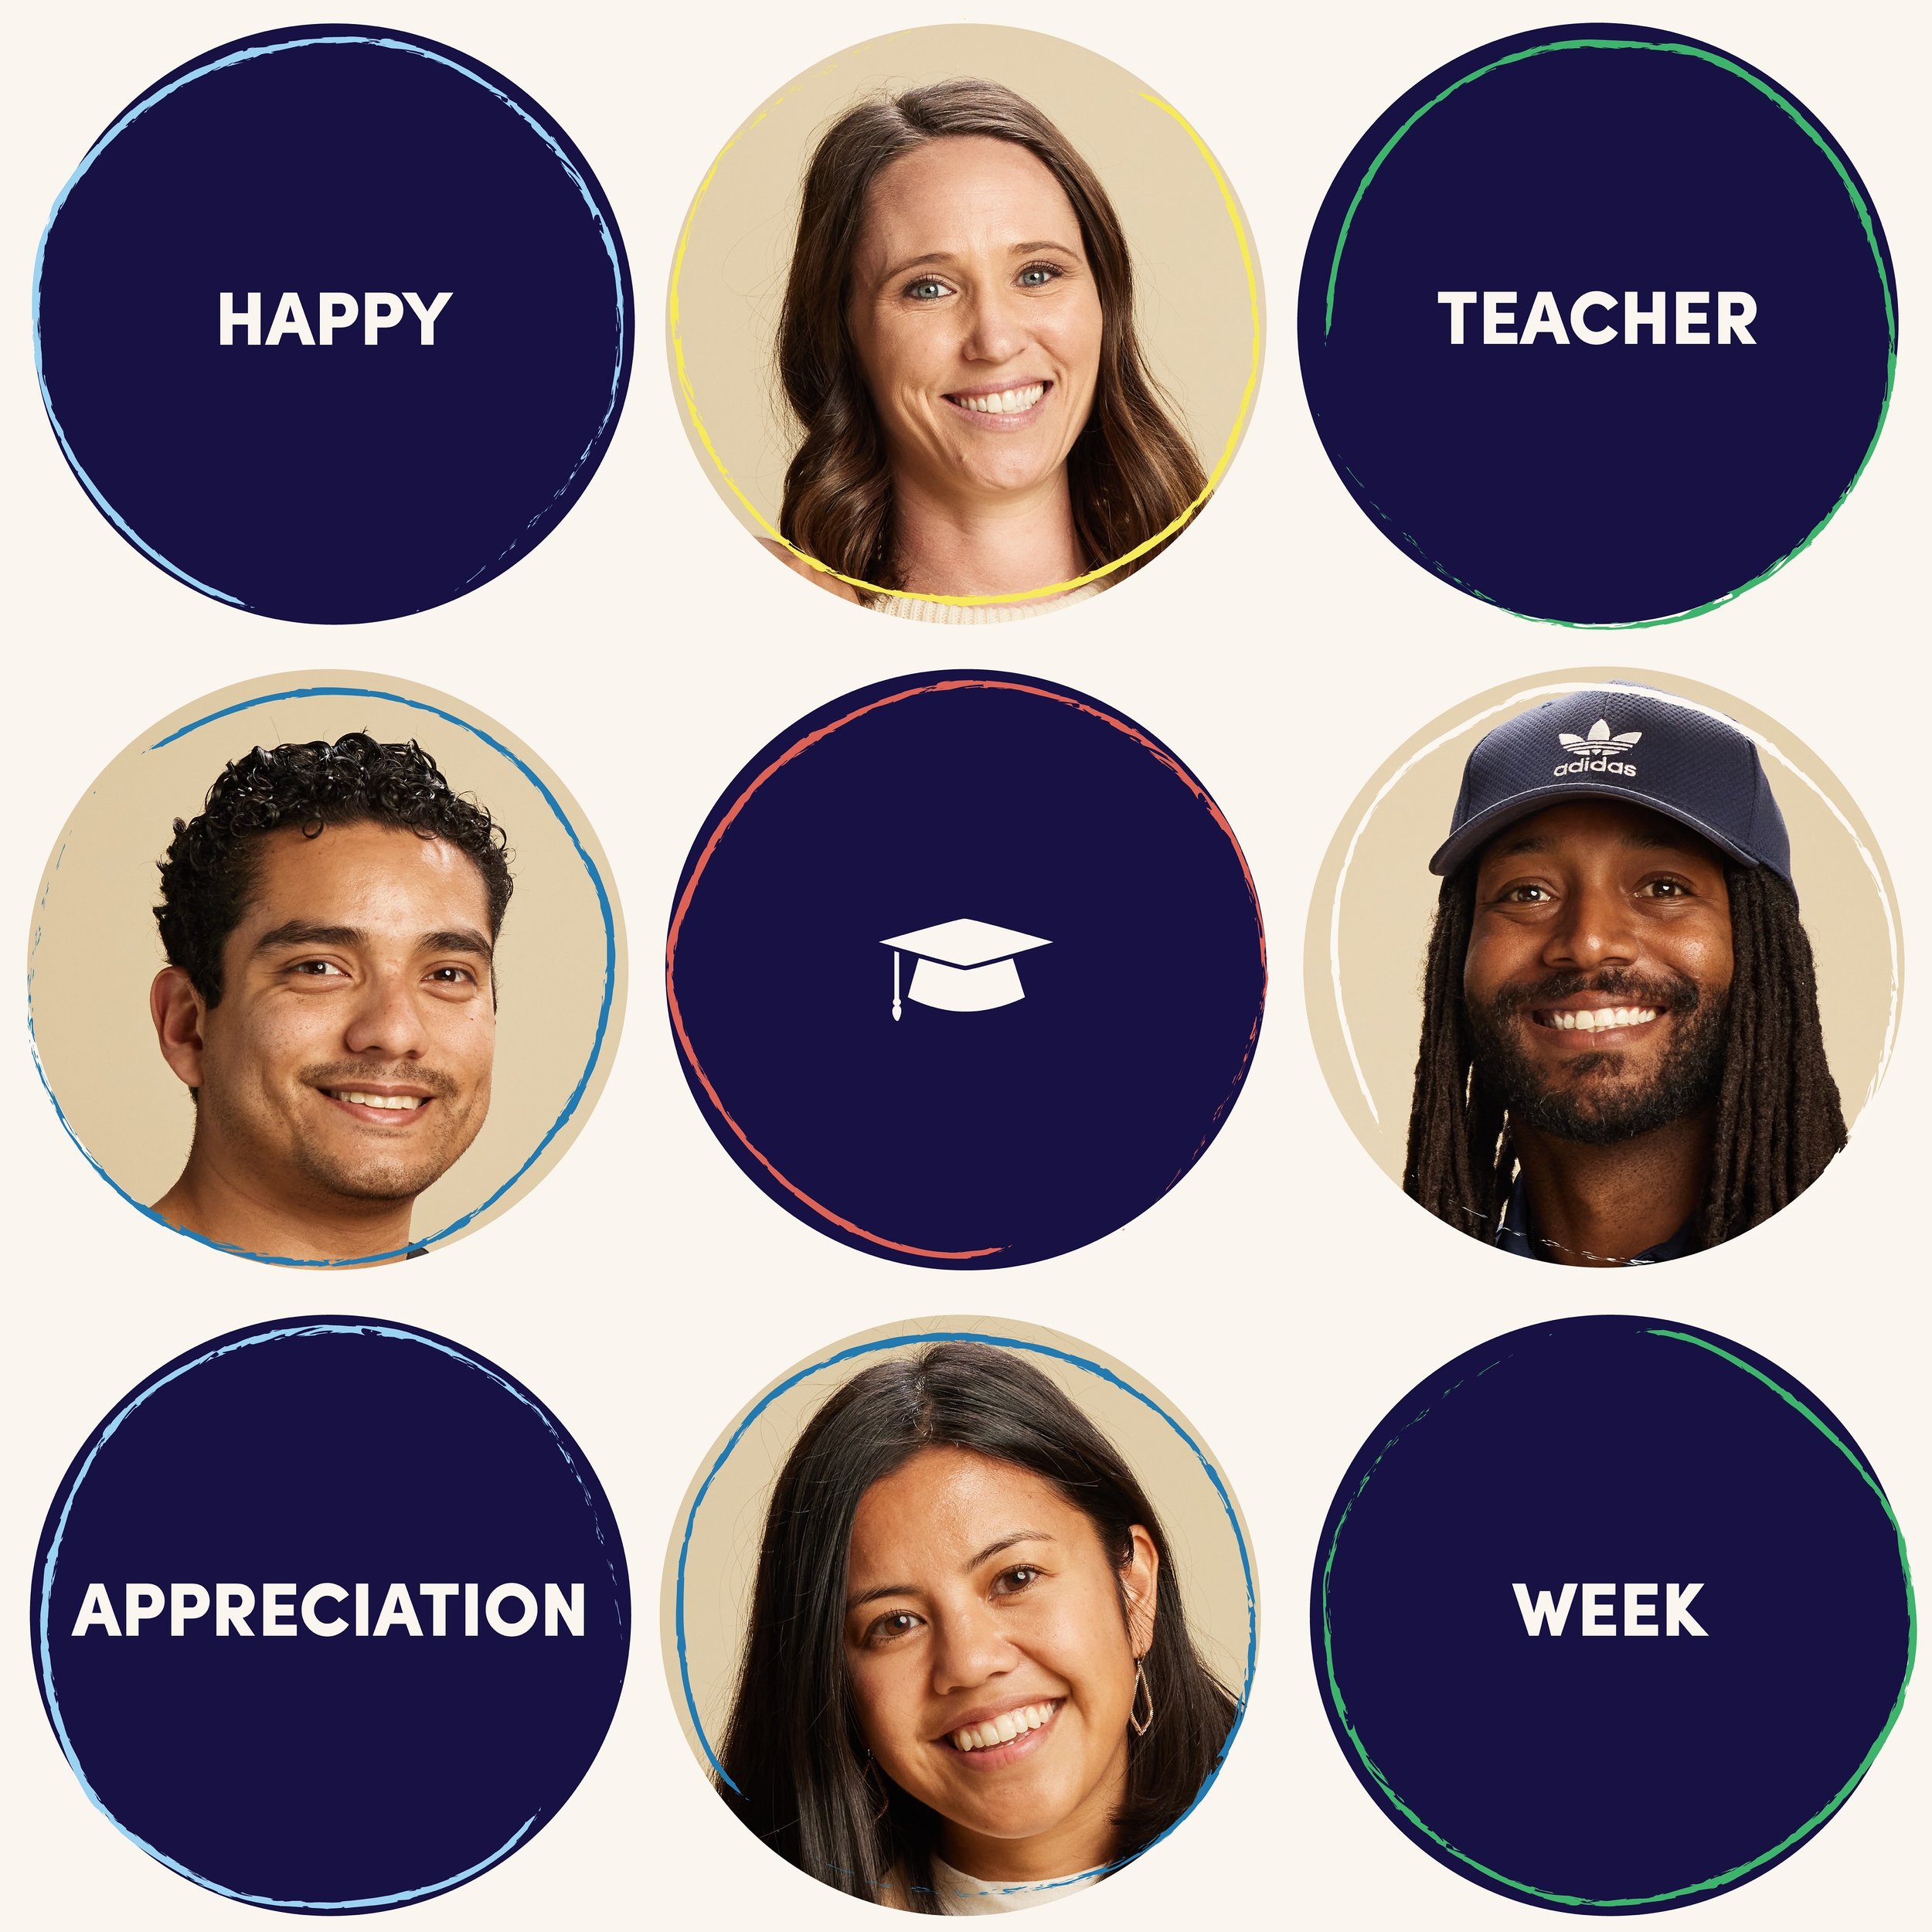 Happy Teacher Appreciation Week to each and every one of our teachers at Vista College Prep! We are thankful for you! Your exceptional dedication and leadership is unmatched.
_______________

&iexcl;Feliz Semana de Apreciaci&oacute;n a los Maestros p